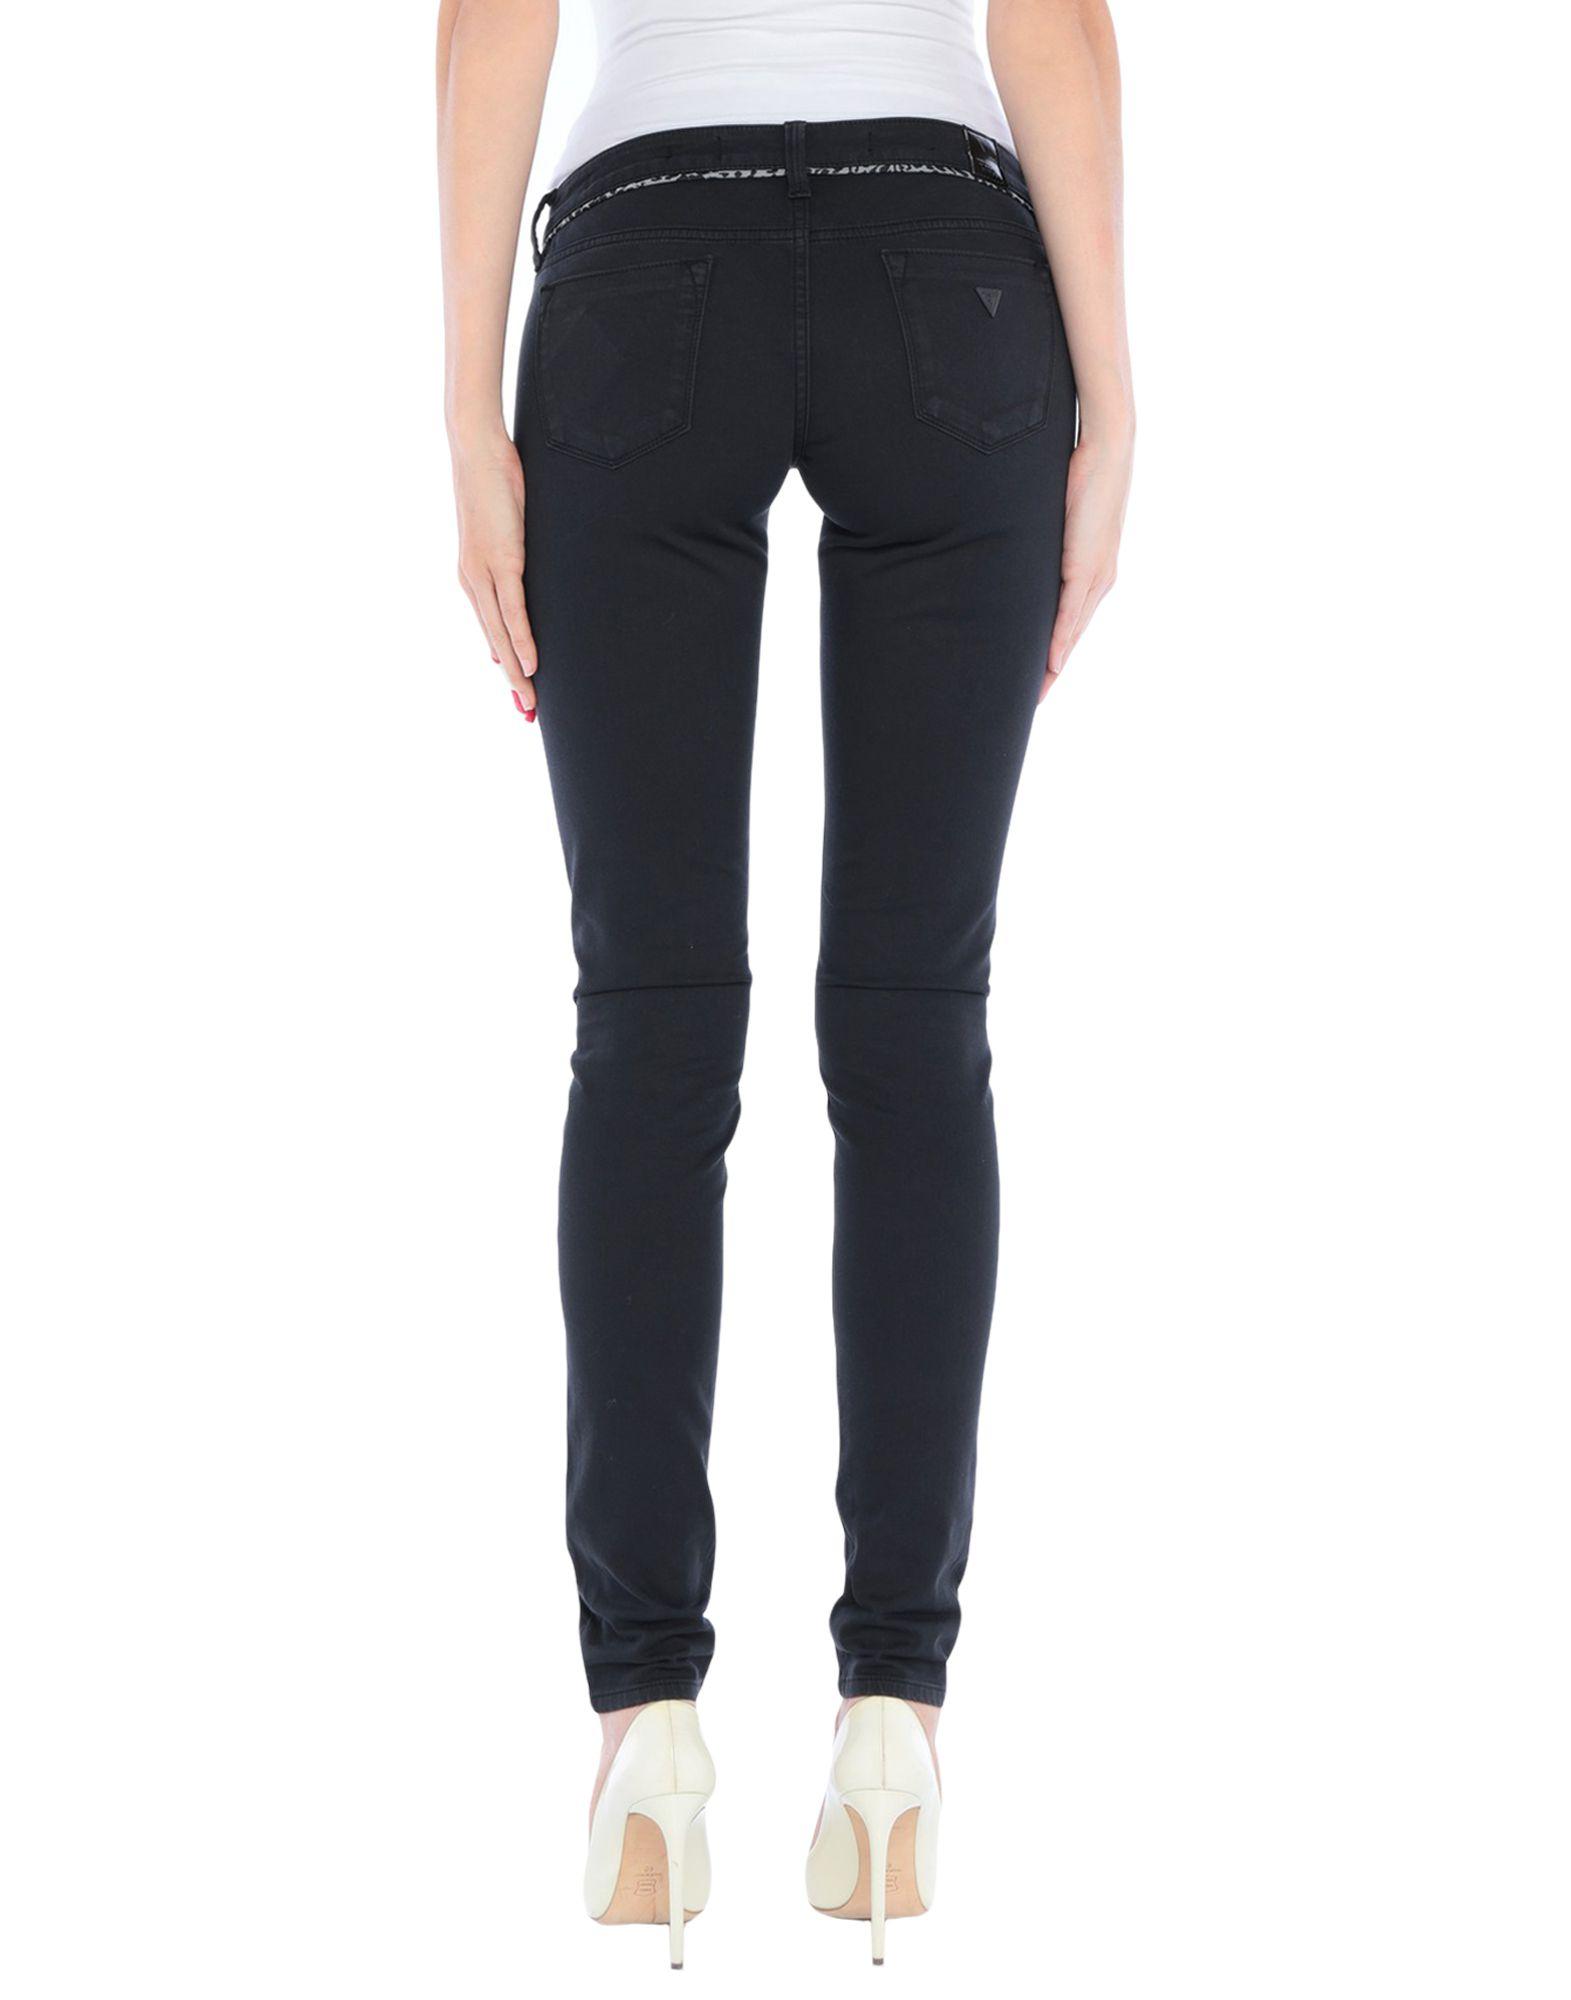 Guess Cotton Casual Pants in Black - Lyst